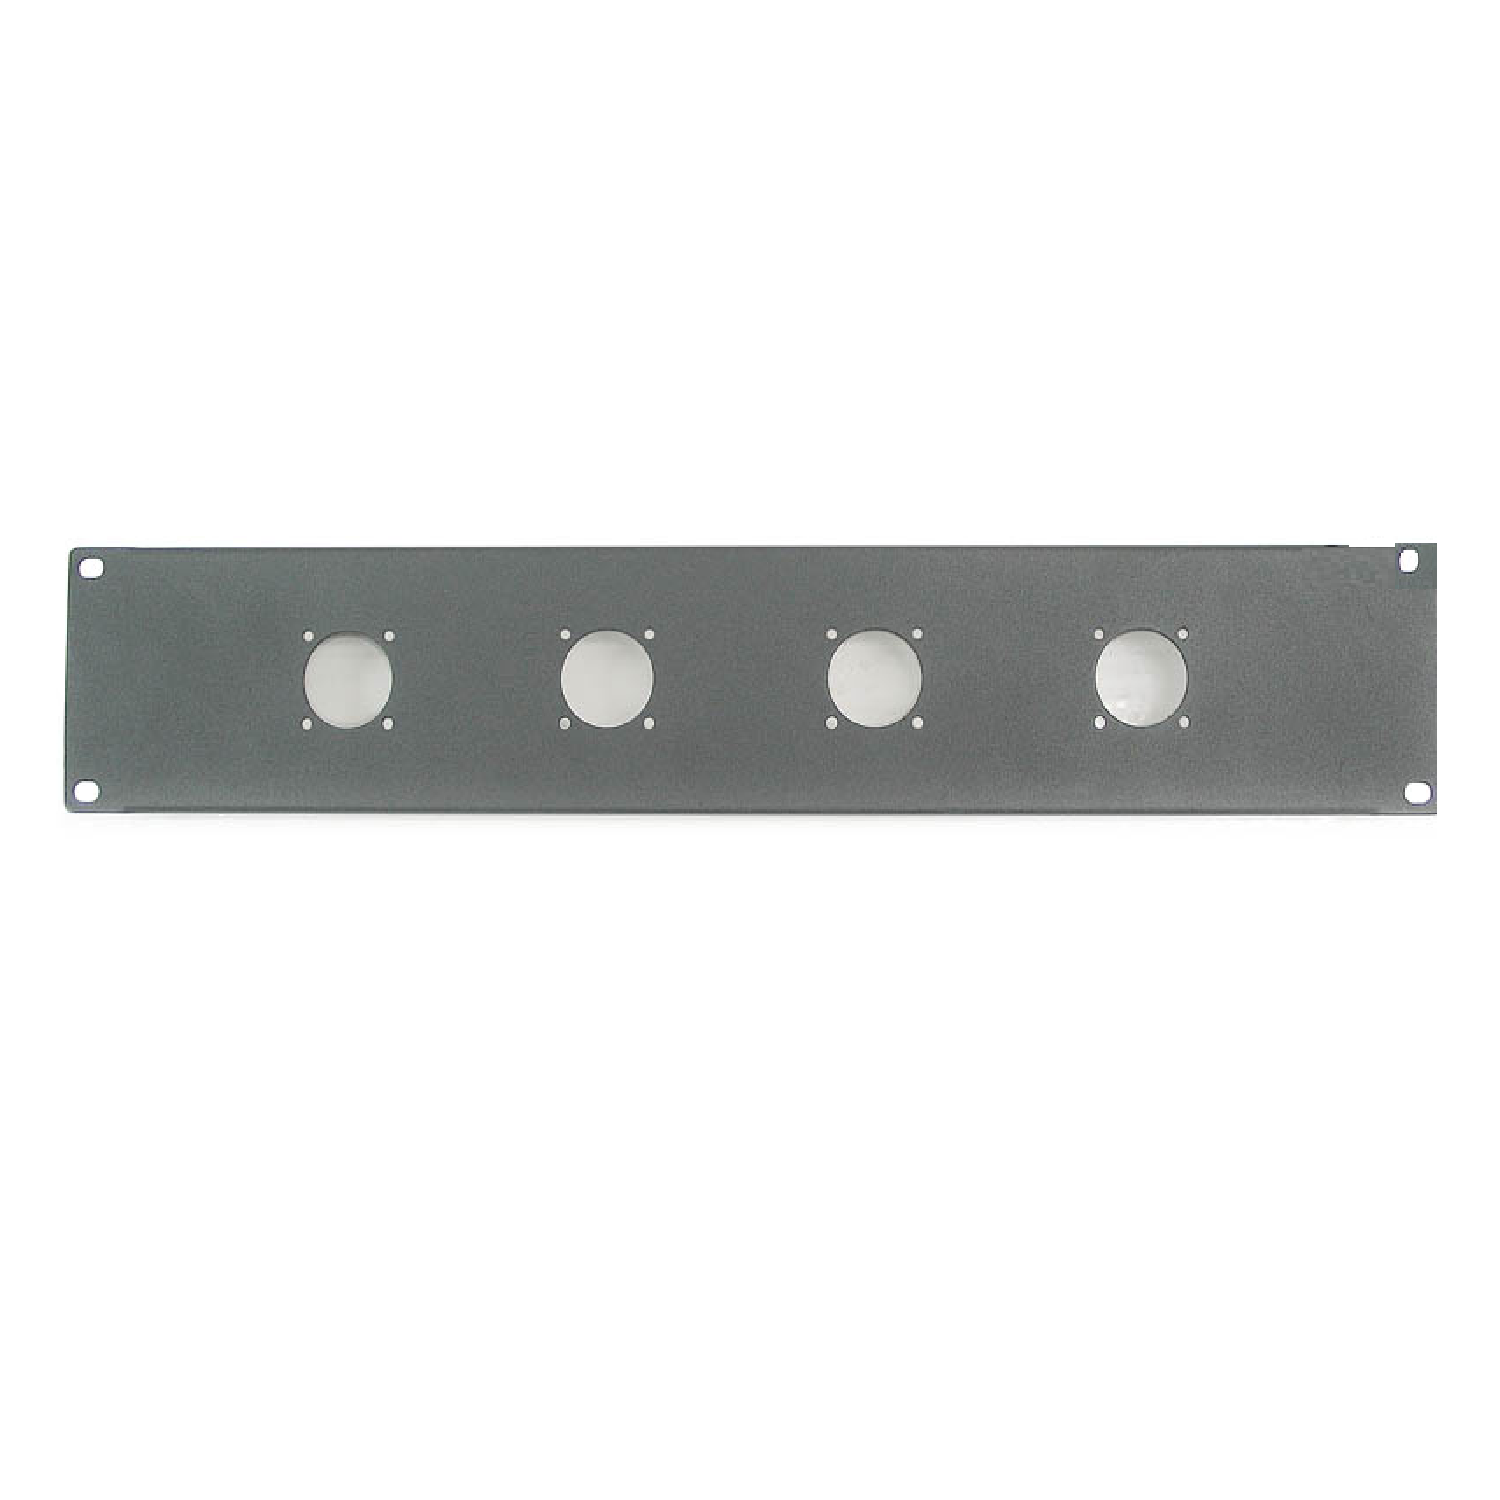 19 Inches Rack Panel, 1.5mm Metal with 4 Holes for Speakon 2U   RP2UM4 procase